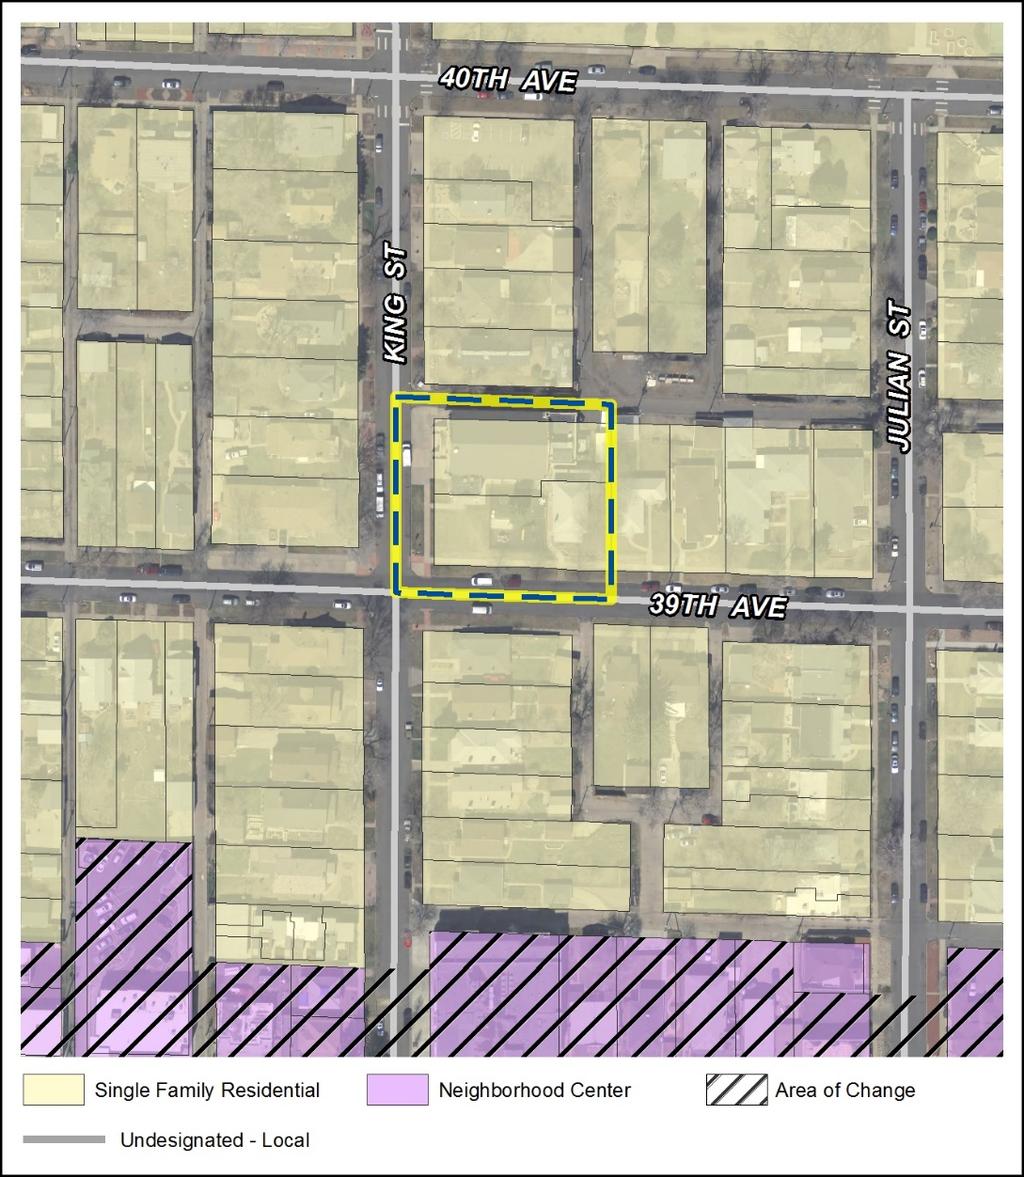 Rezoning Application #2015I-00174 3914 N. King Street and 3441 W.